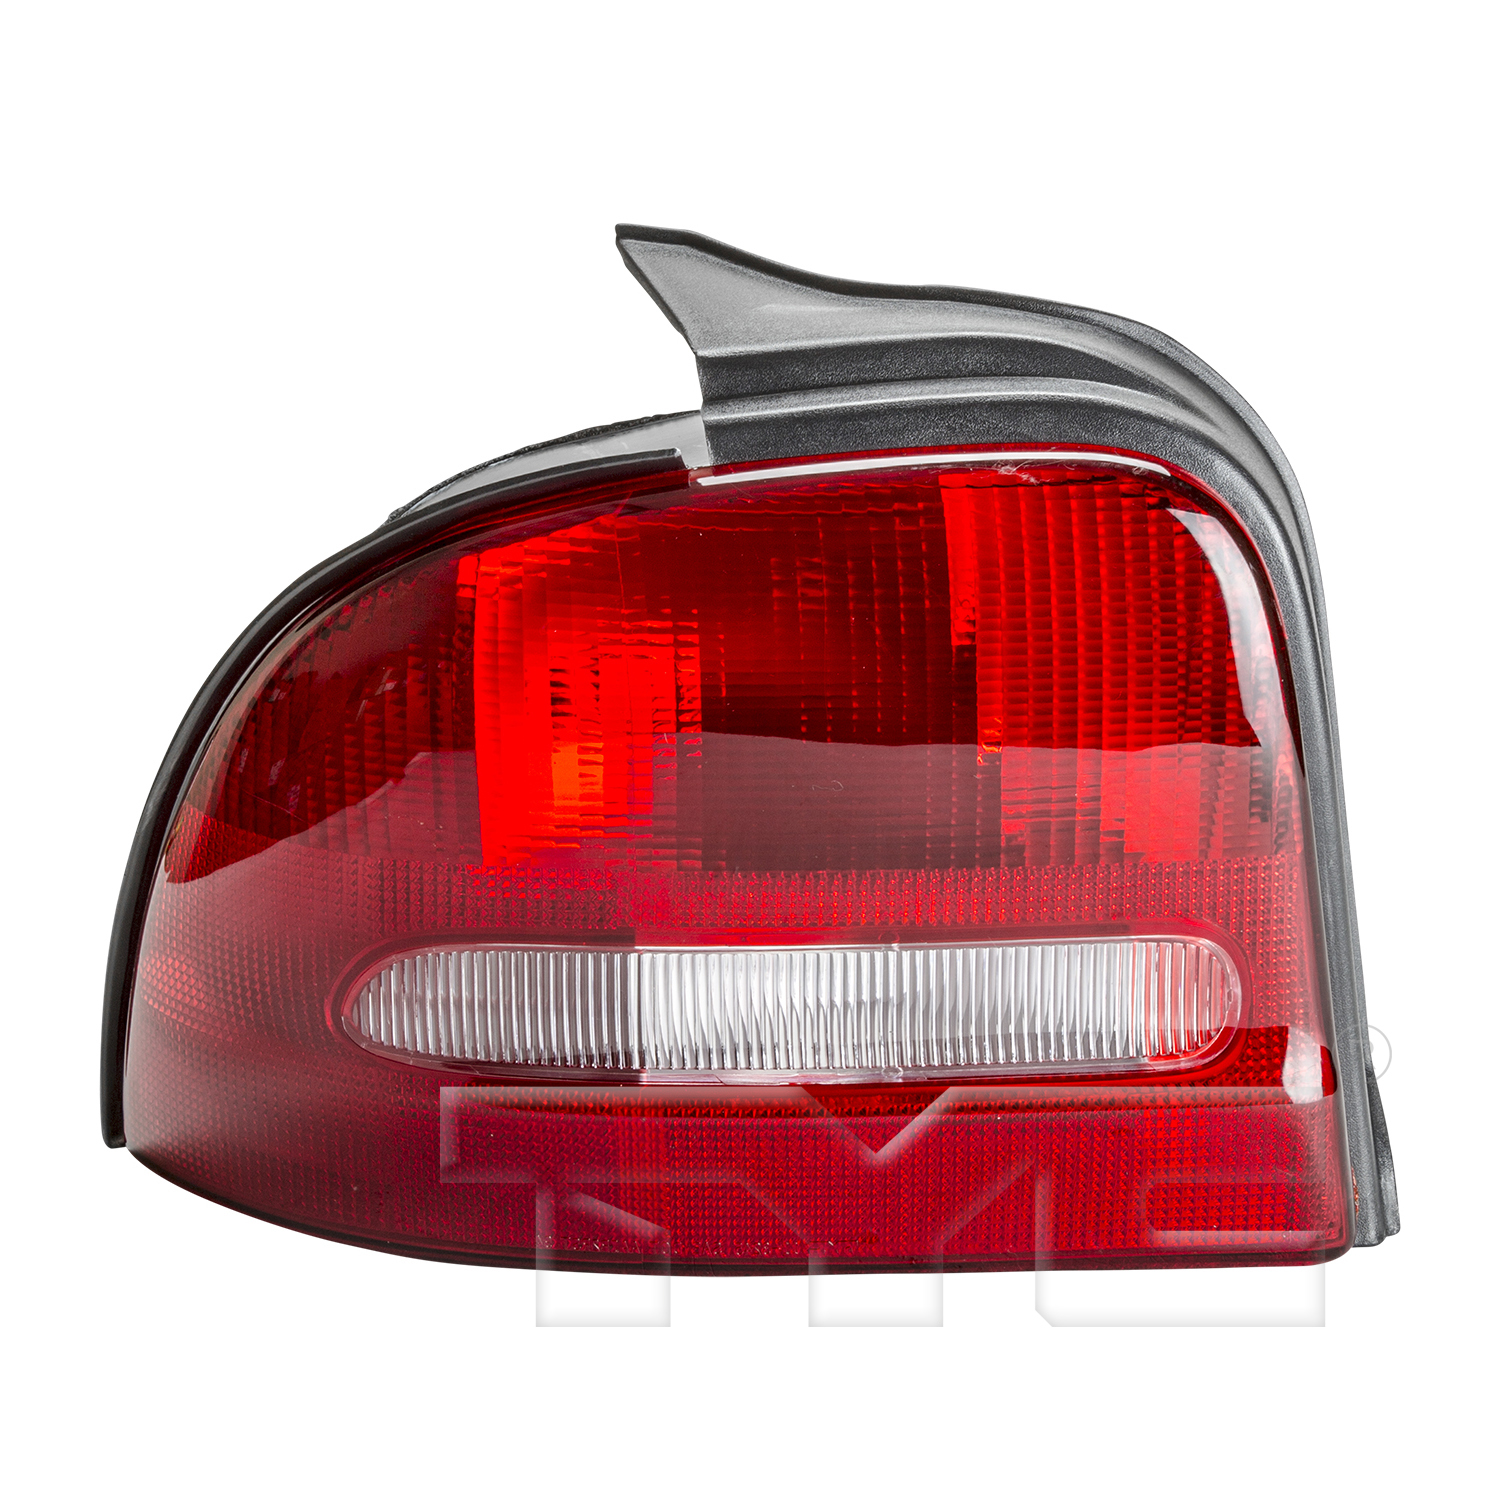 Aftermarket TAILLIGHTS for DODGE - NEON, NEON,95-99,LT Taillamp assy